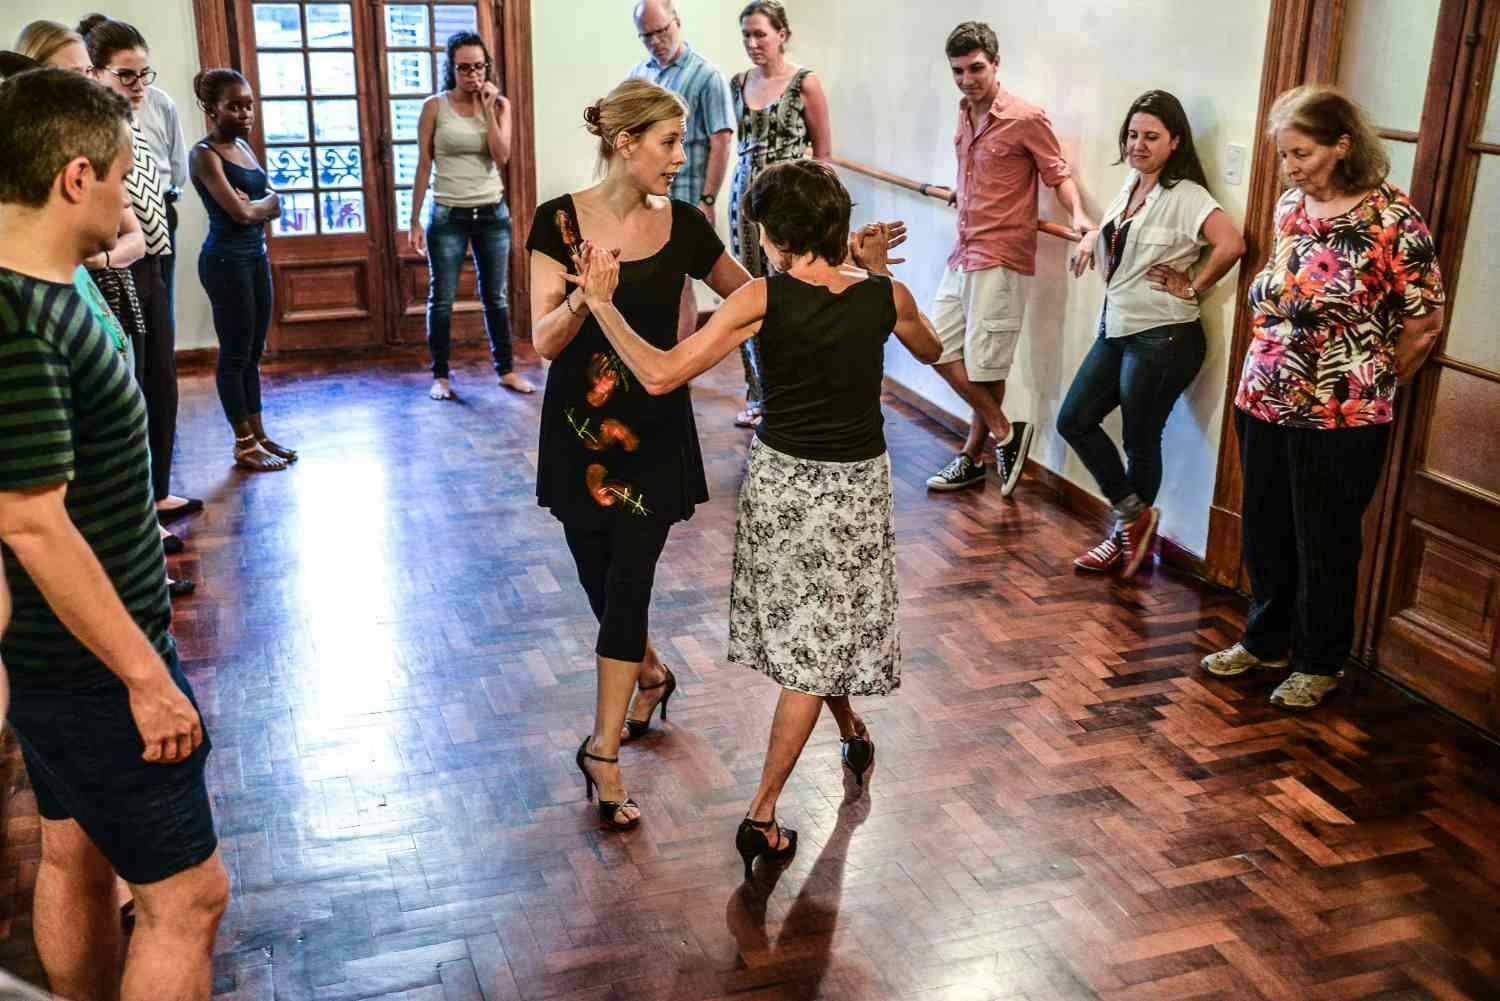 Learning tango in Buenos Aires